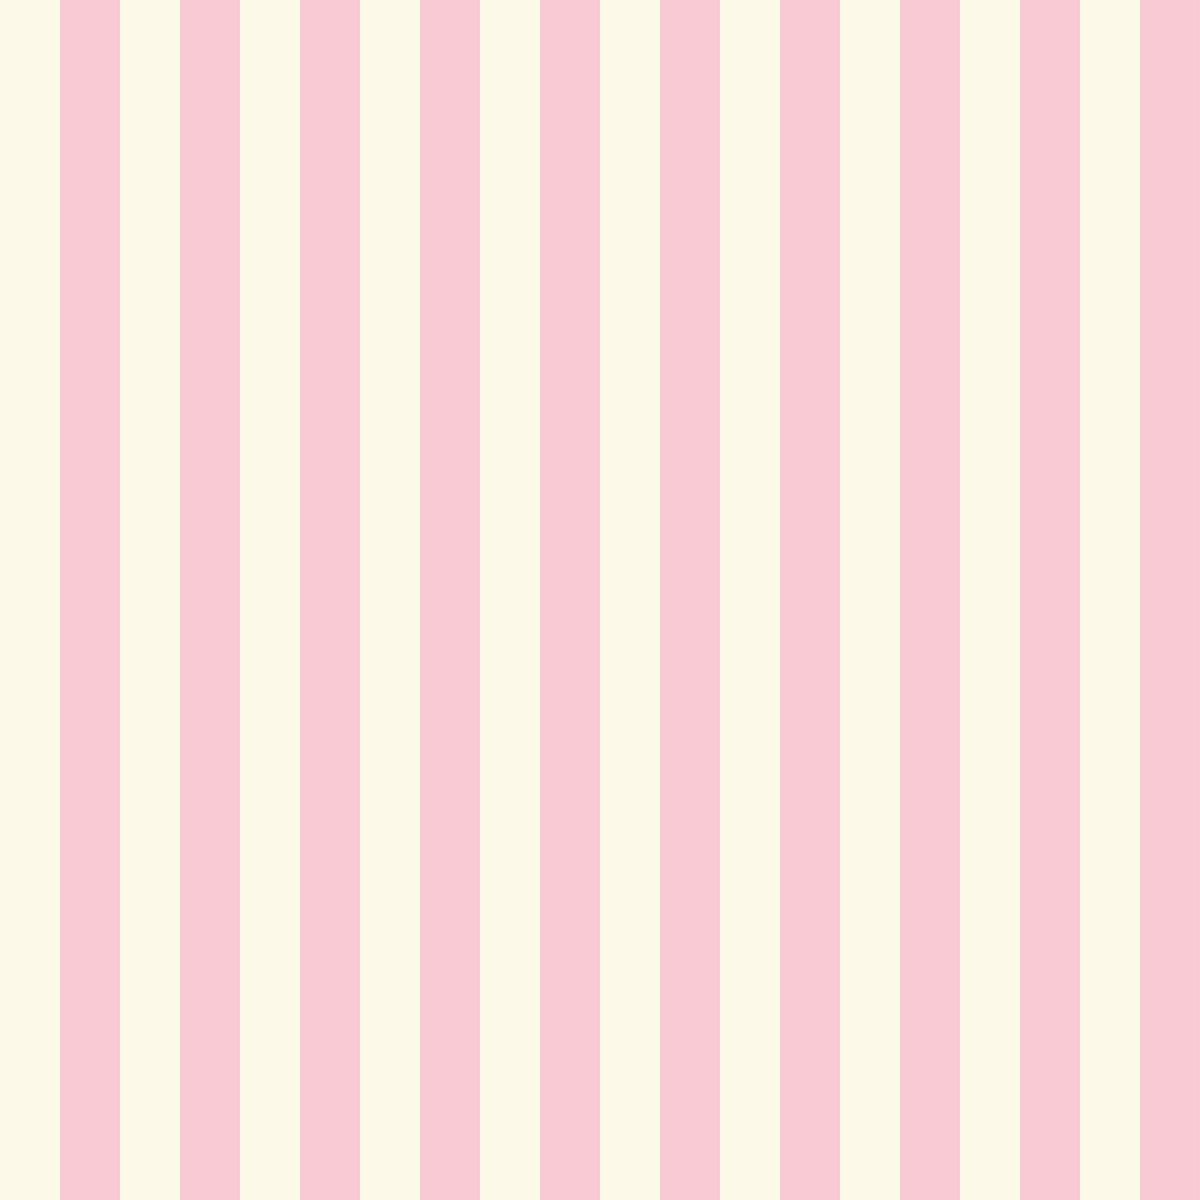 Pink Striped | Peel and Stick | Fabric Wallpaper